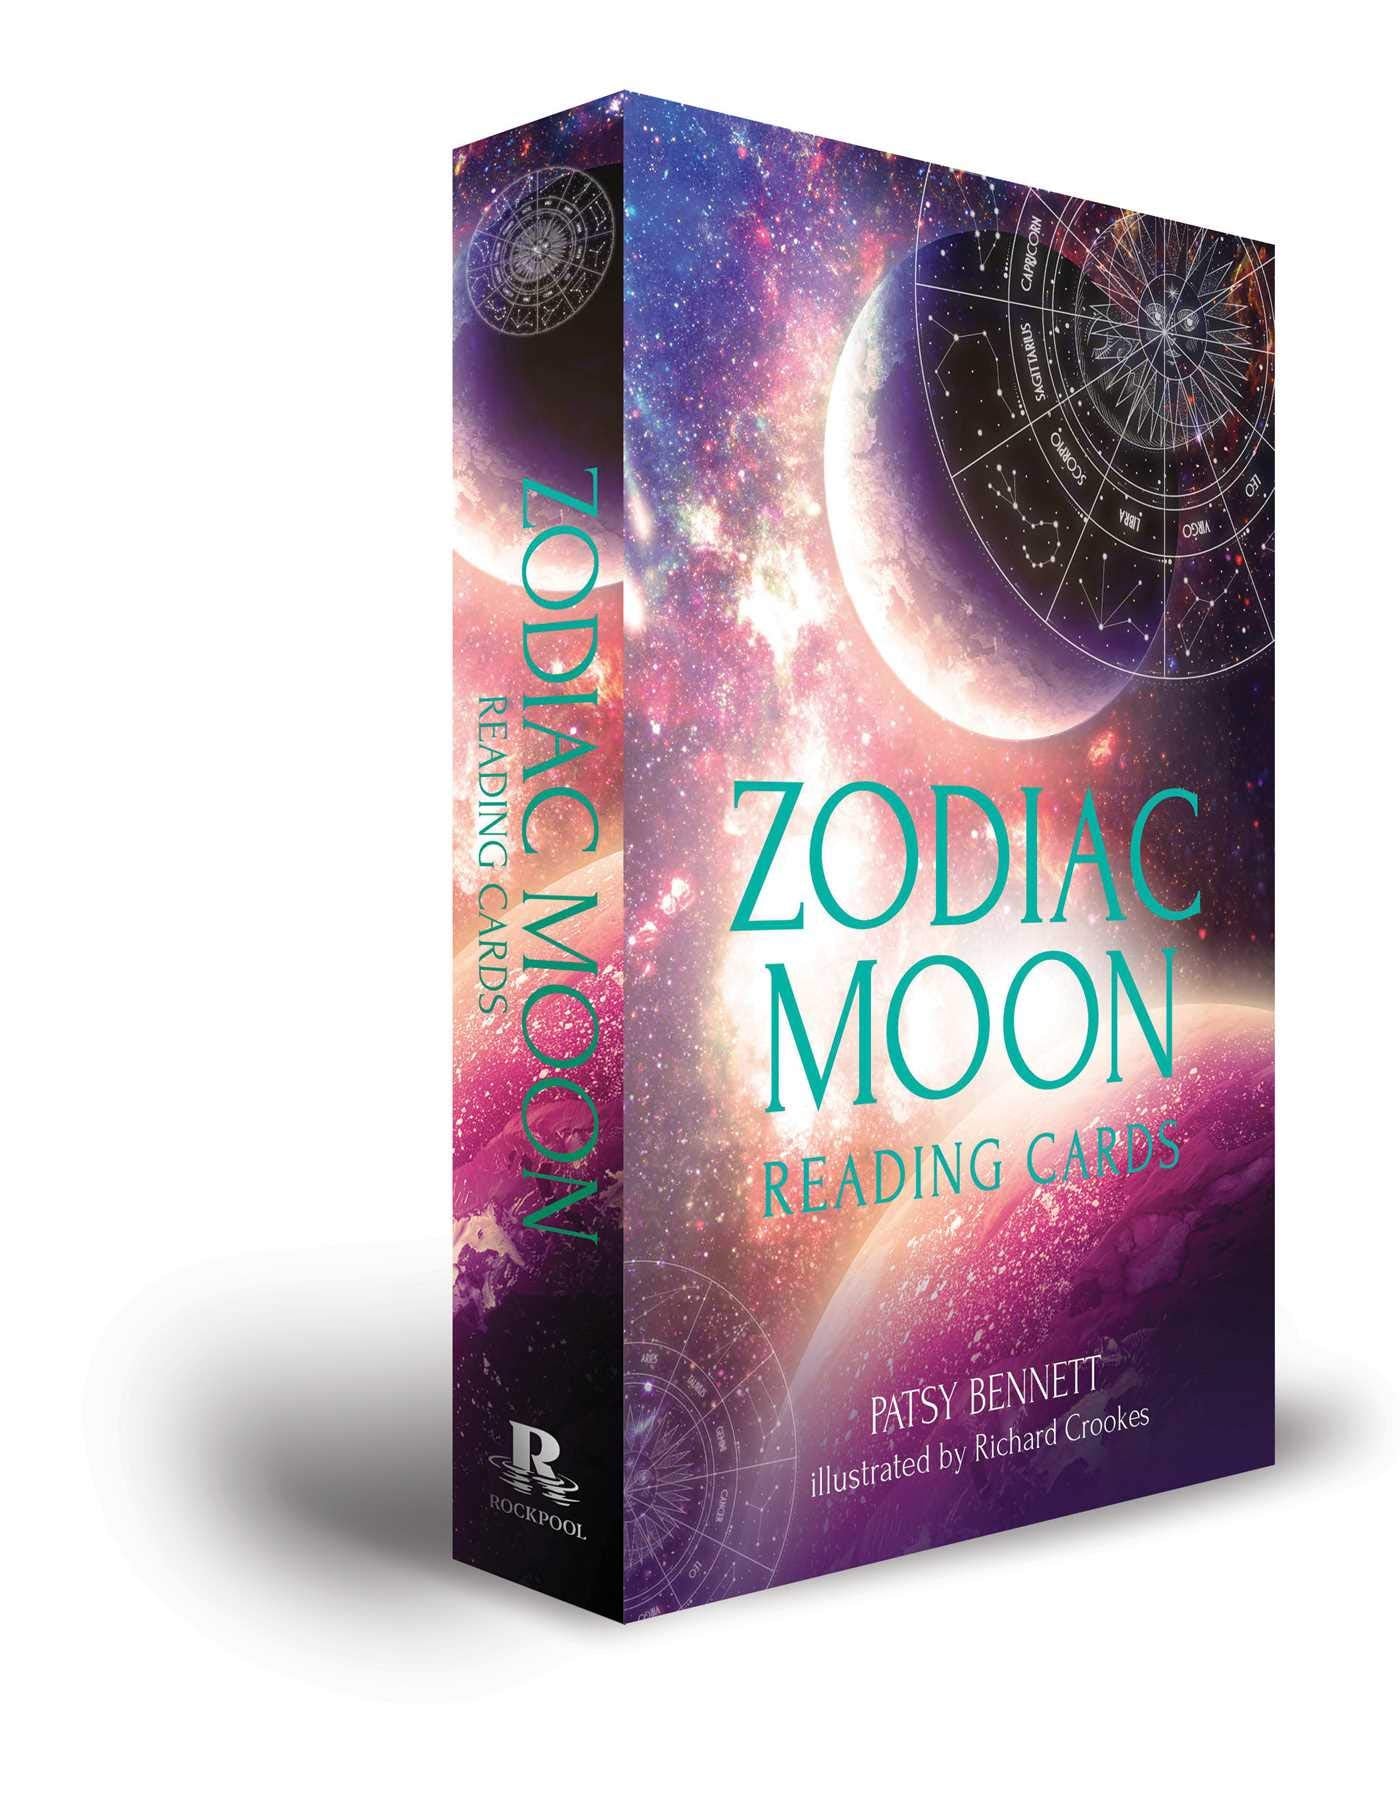 Zodiac Moon Reading Cards: Celestial guidance at your fingertips